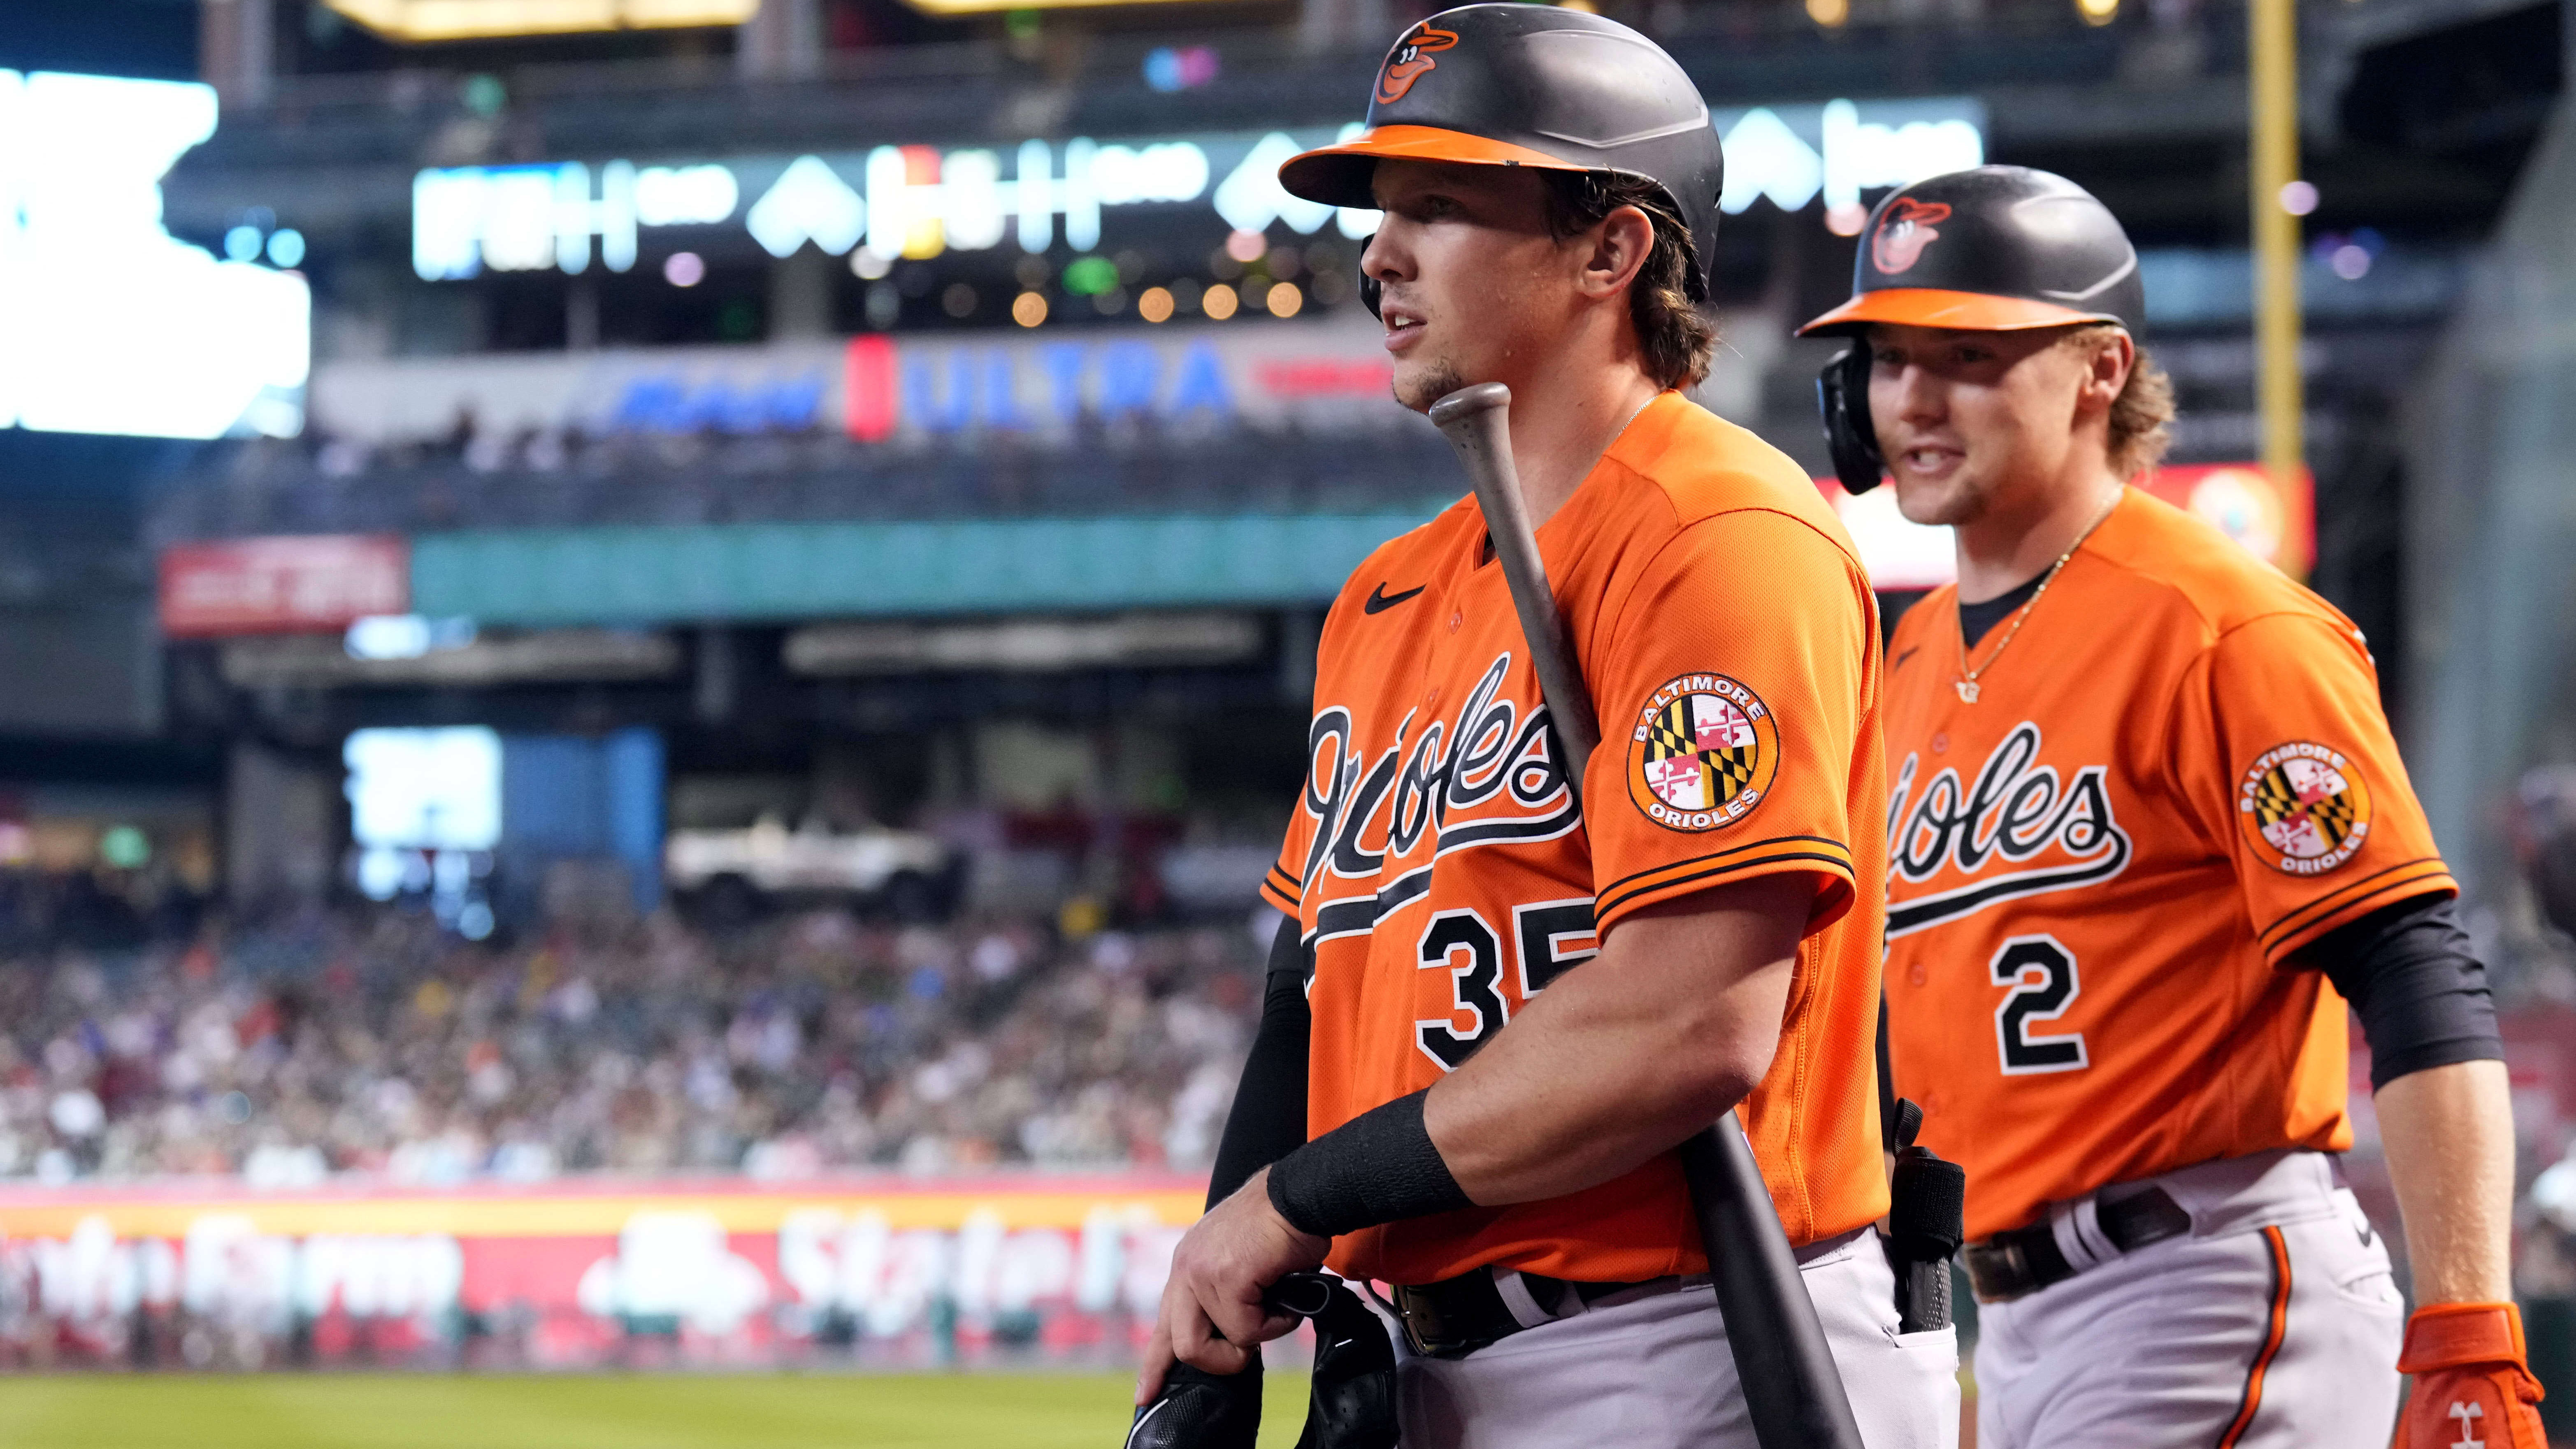 The Orioles are MLB's unconventional World Series contender